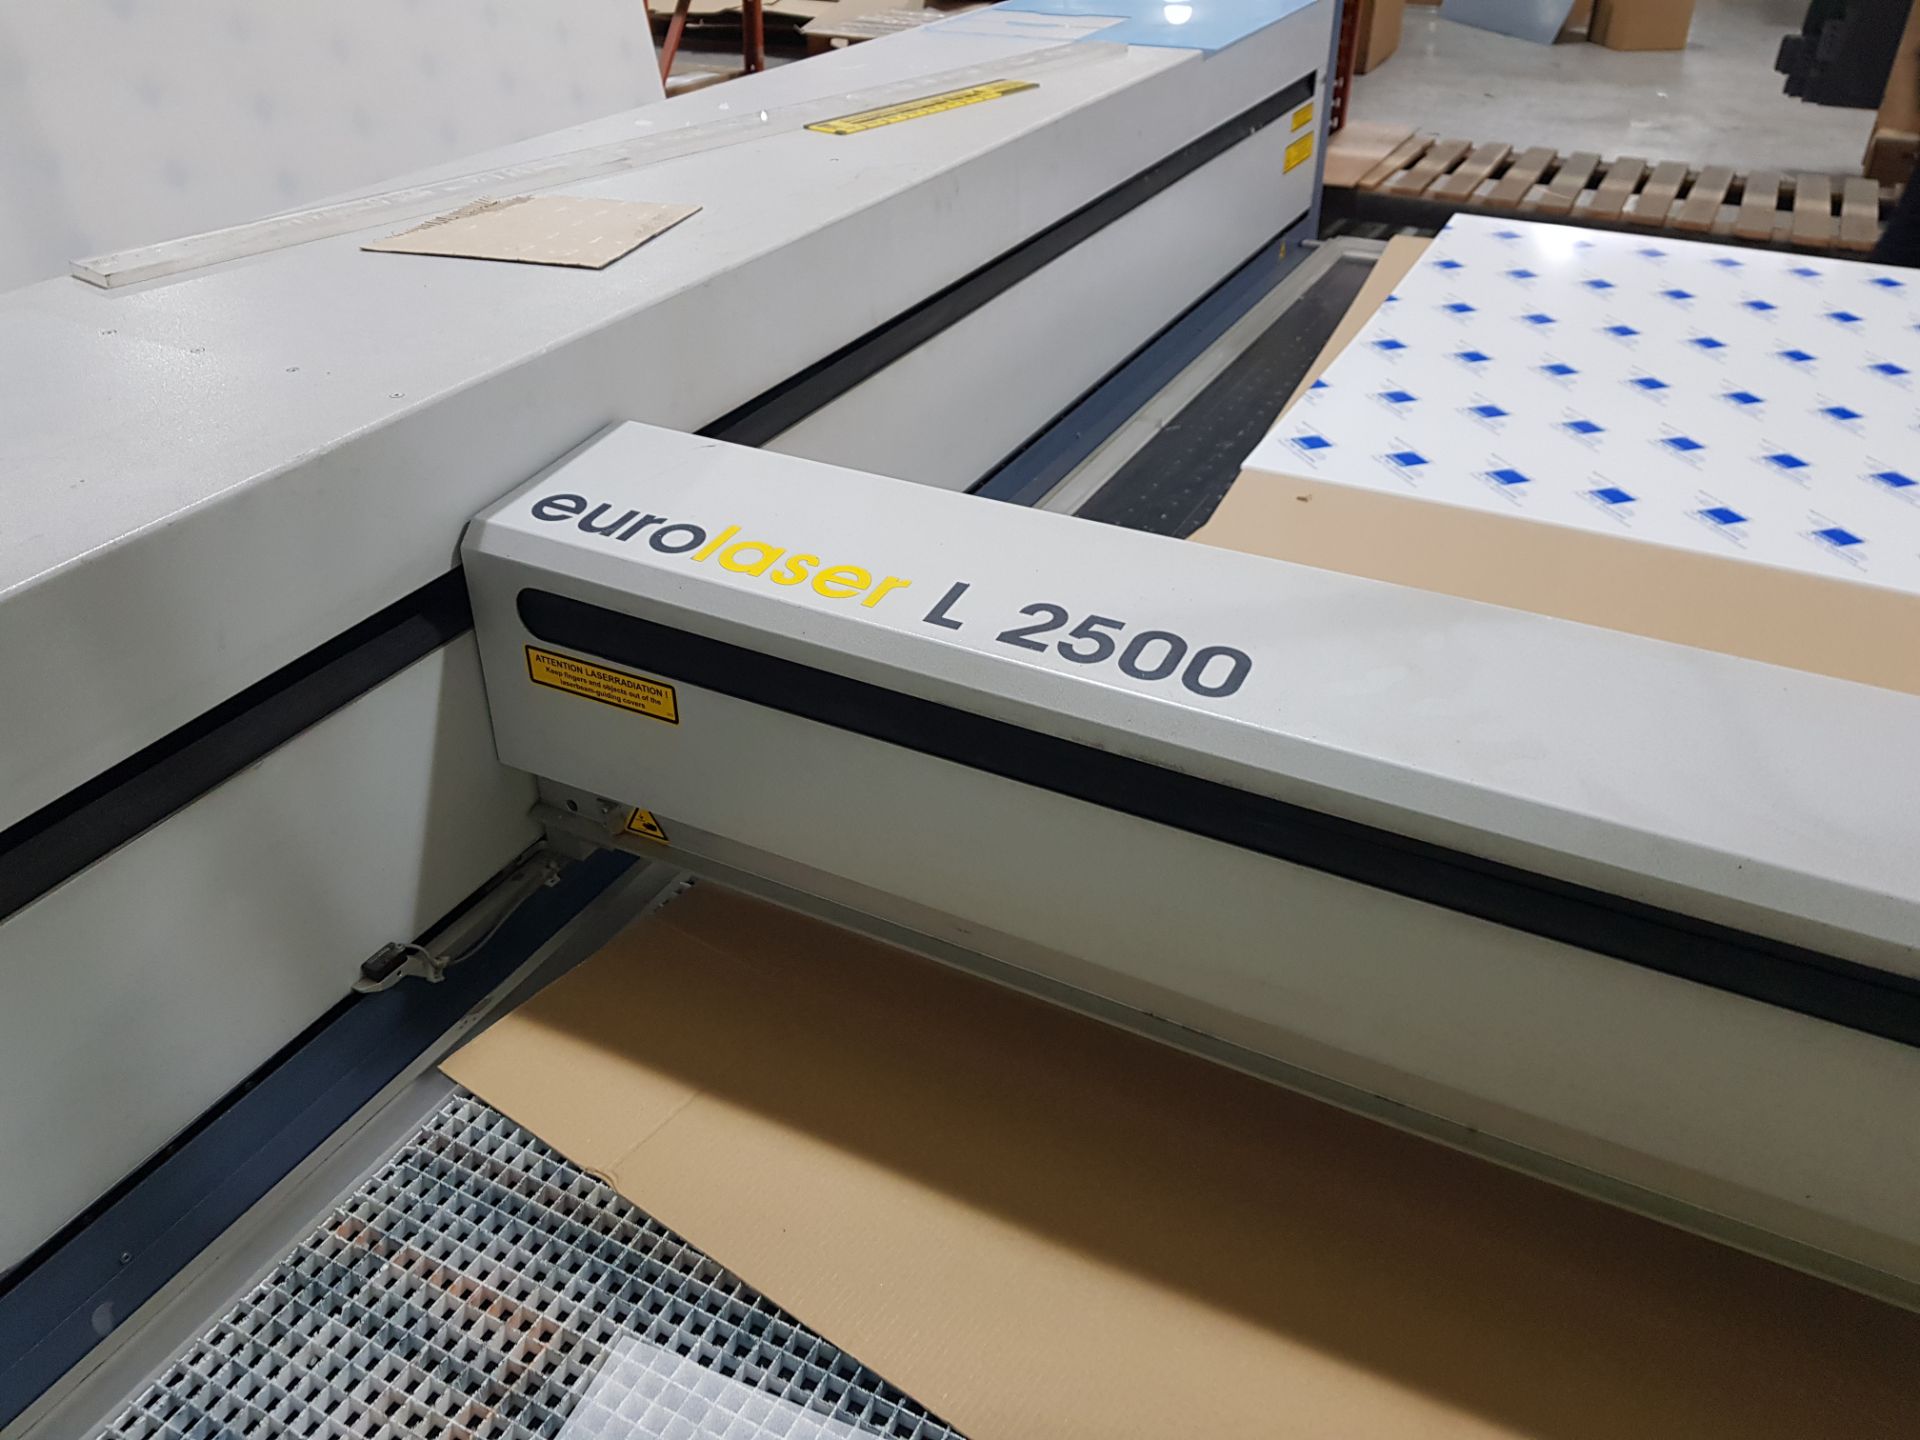 EURO LASER L 2500 LASER CUTTER WITH LASER POWER SUPPLY SYNRAD EVOLUTION RF 3000 SET 1 & 2, 240W WITH - Image 4 of 9